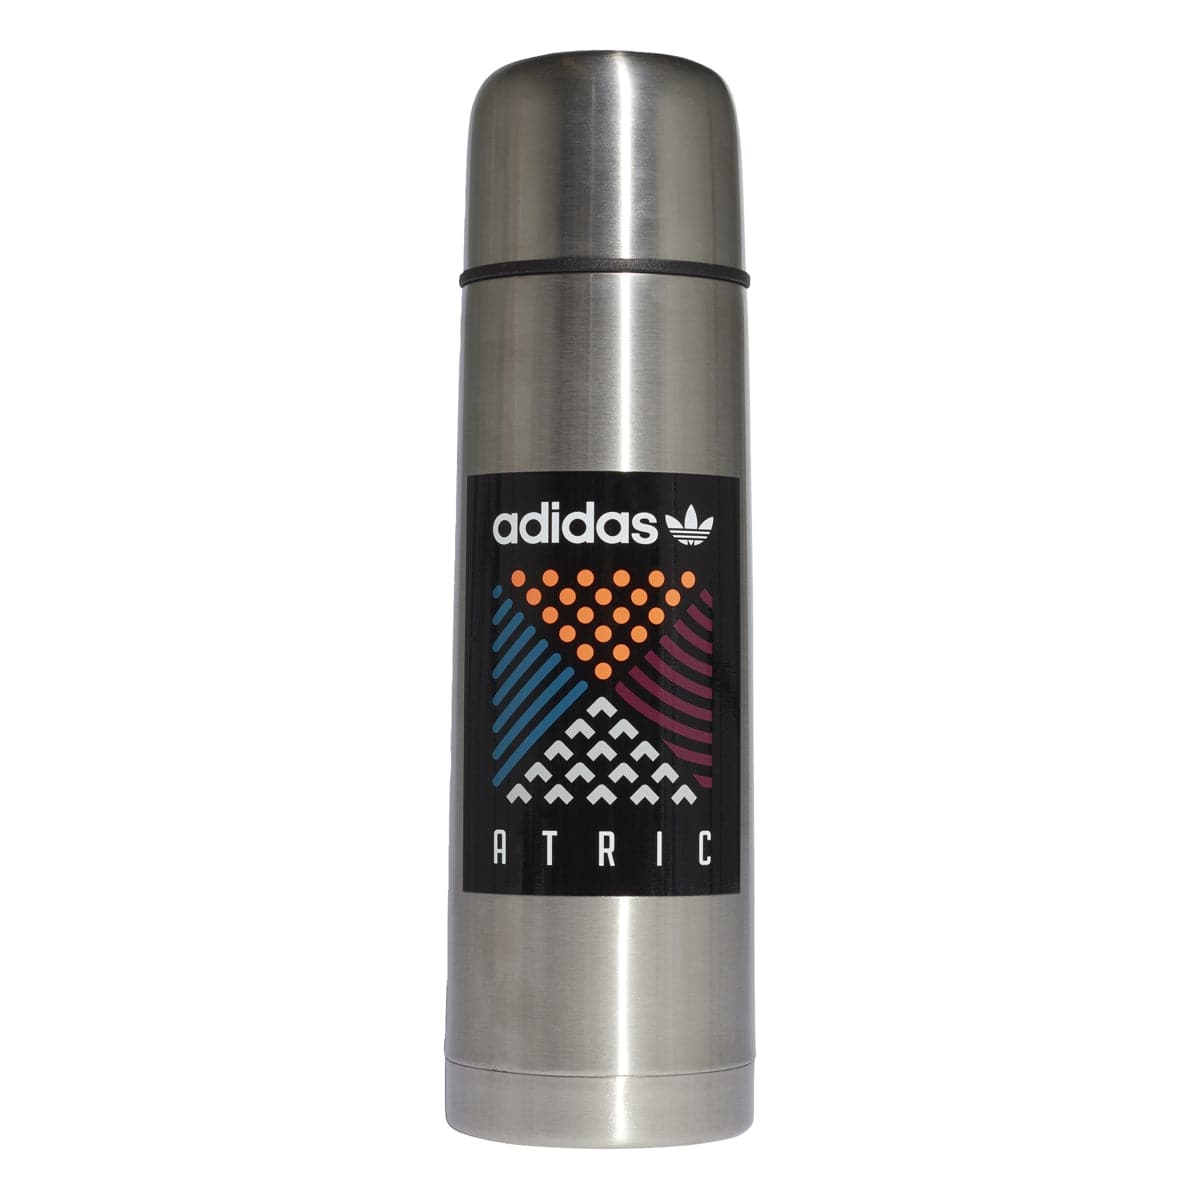 adidas Thermos Bottle 'Atric' (Silber)  - Allike Store